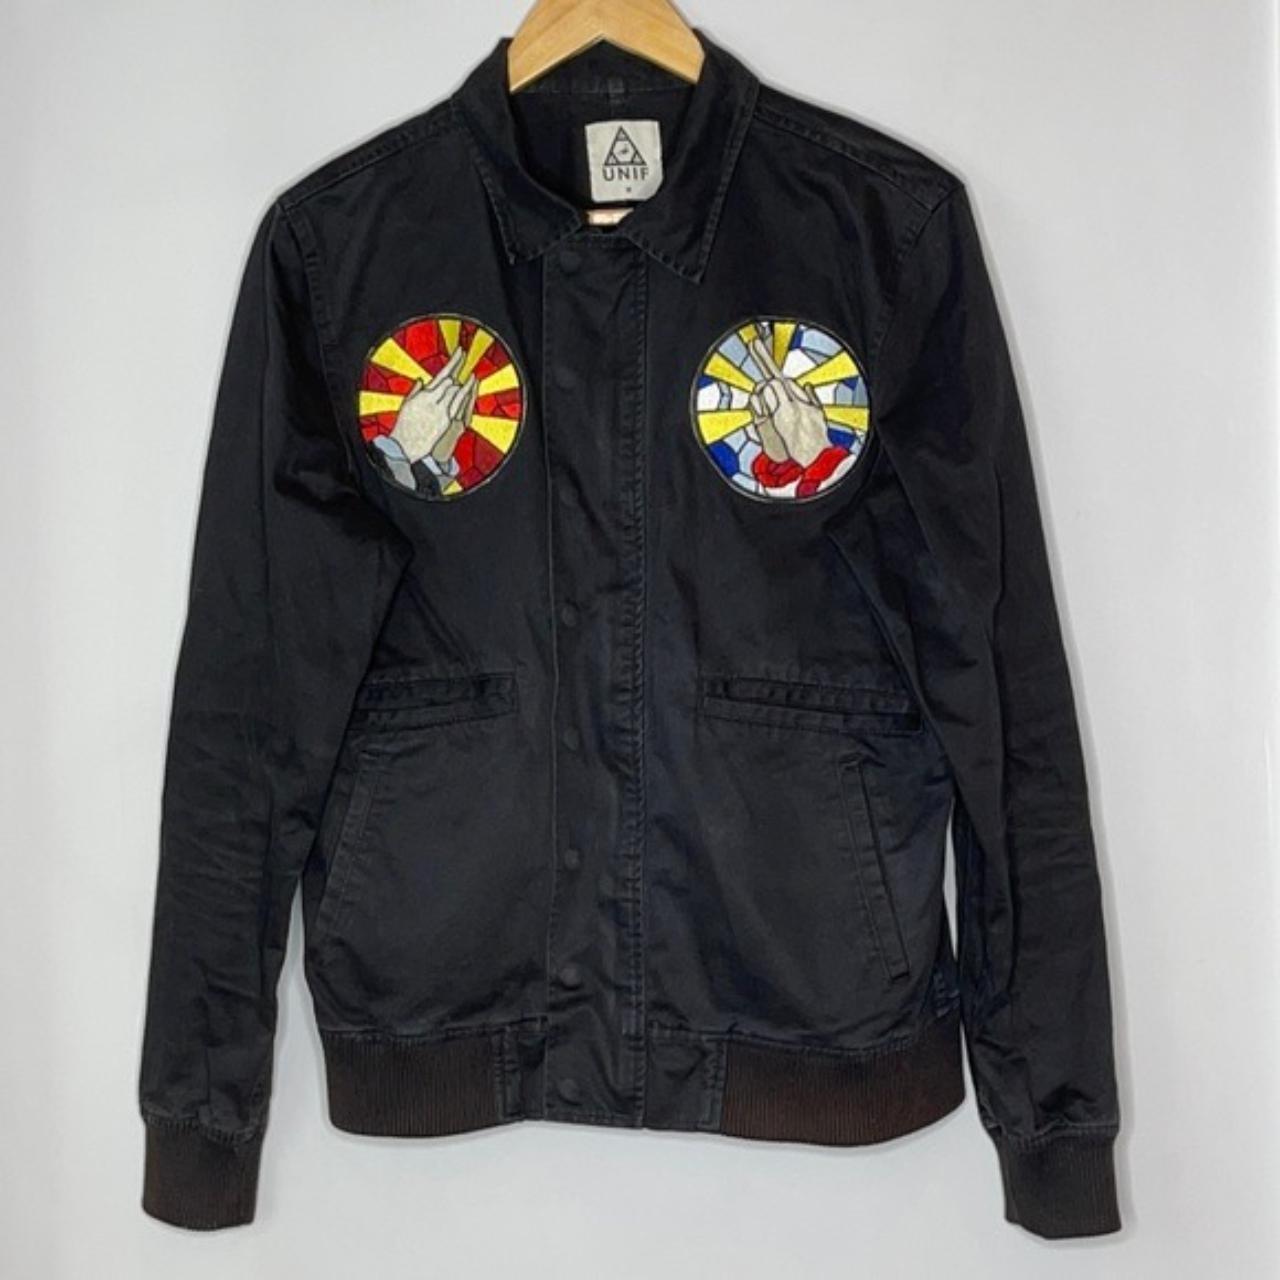 Product Image 2 - Love this Rare UNIF jacket